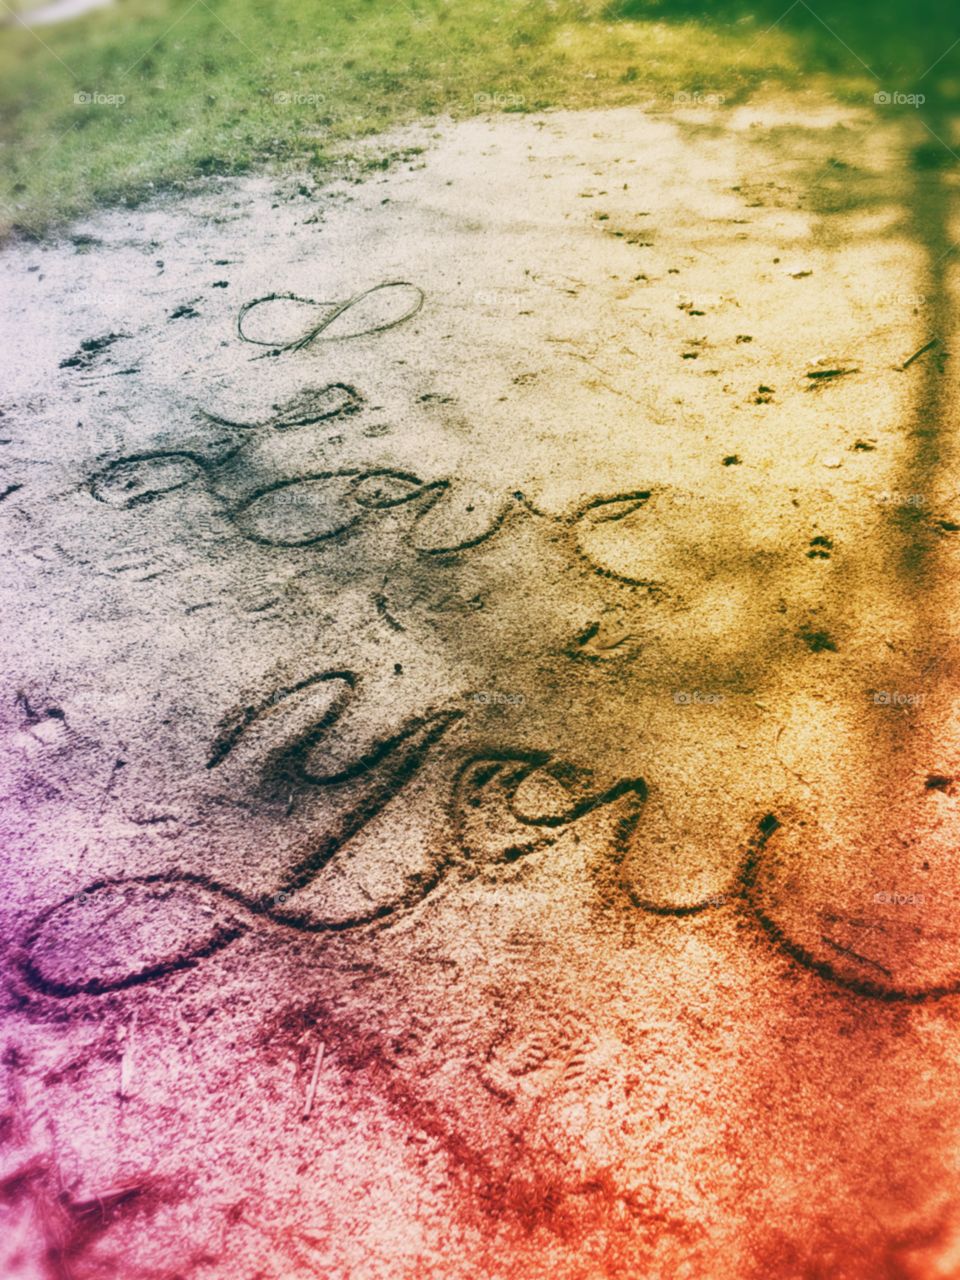 My lovely girlfriend drew this into the sand in the summer time last year, in a volleyball court at a park. I knew it wouldn’t last long so I made sure I’d have it forever. LGBT. Who would like to have this in on their wall?